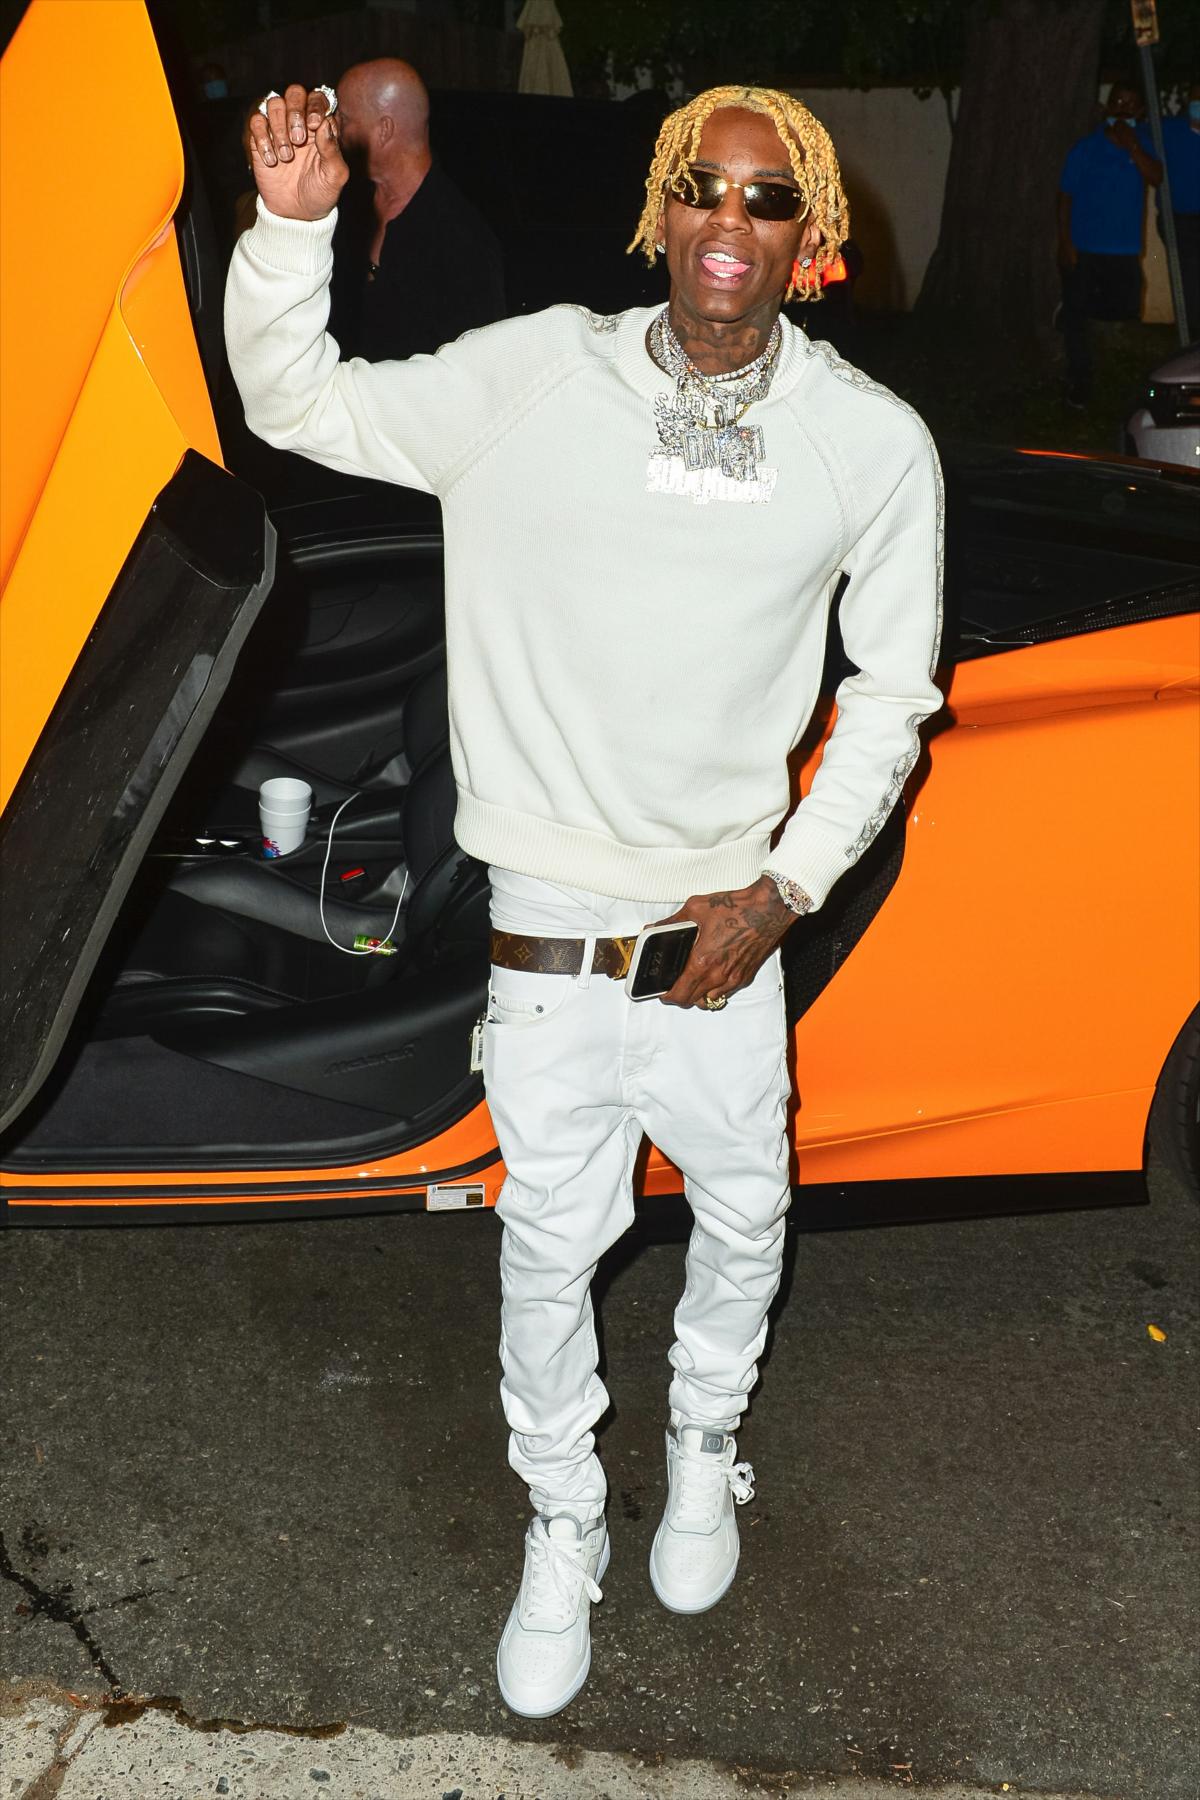 Soulja Boy angry with Kanye West after being cut from Donda